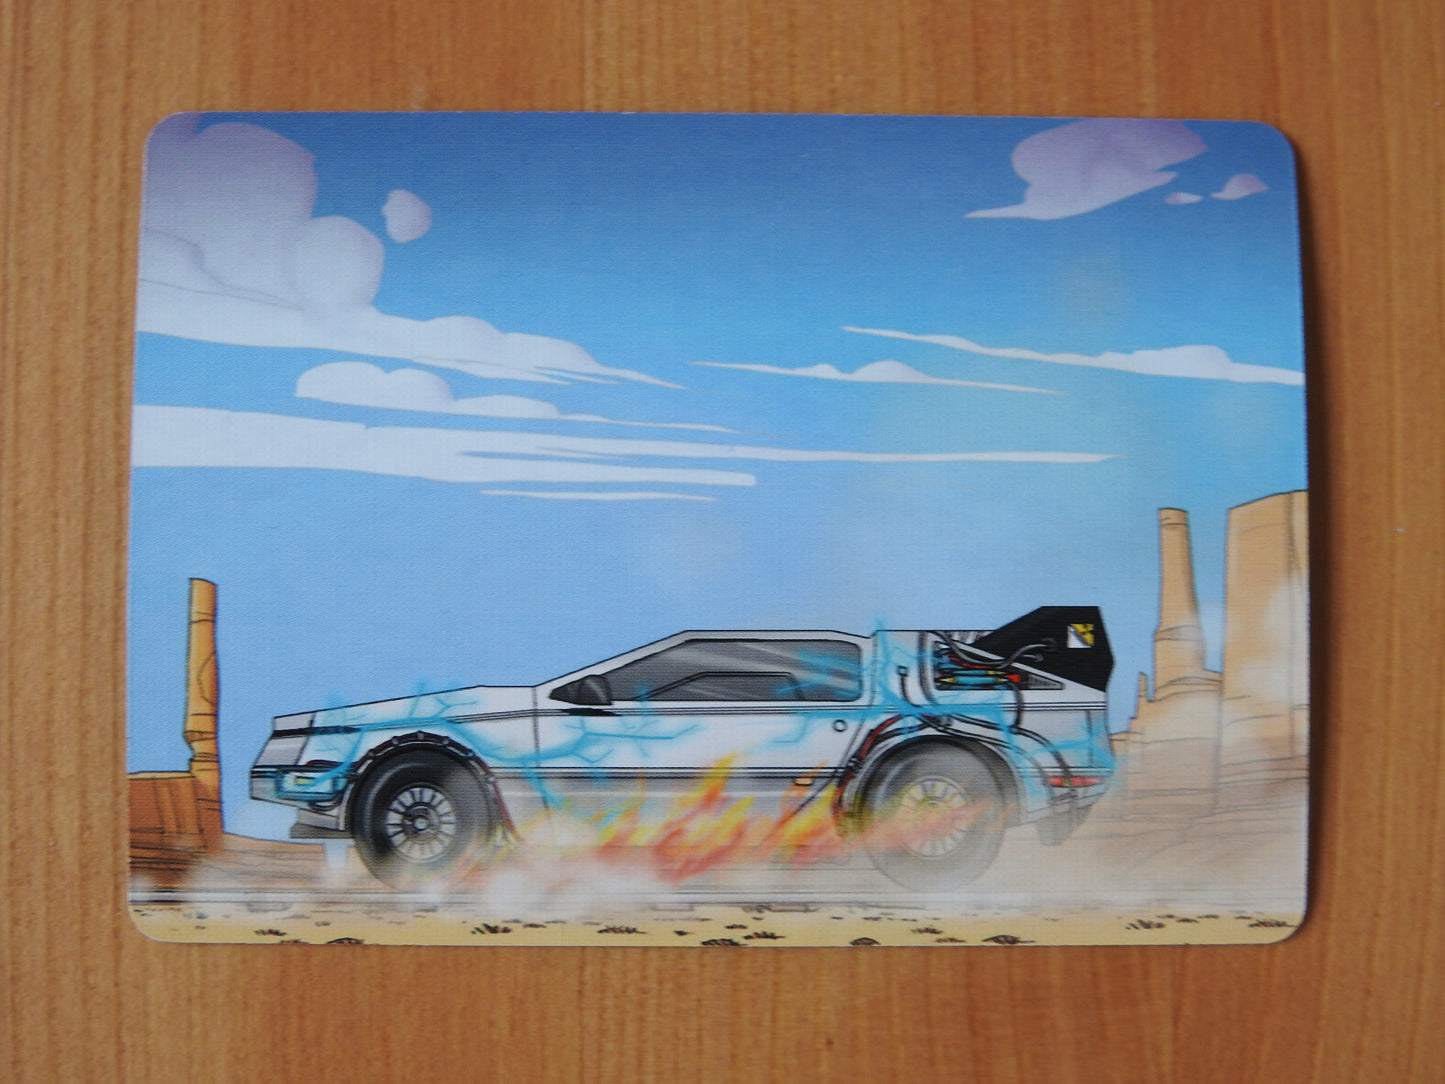 Another view of the card, this time from the obverse, with the car pointing to the left.